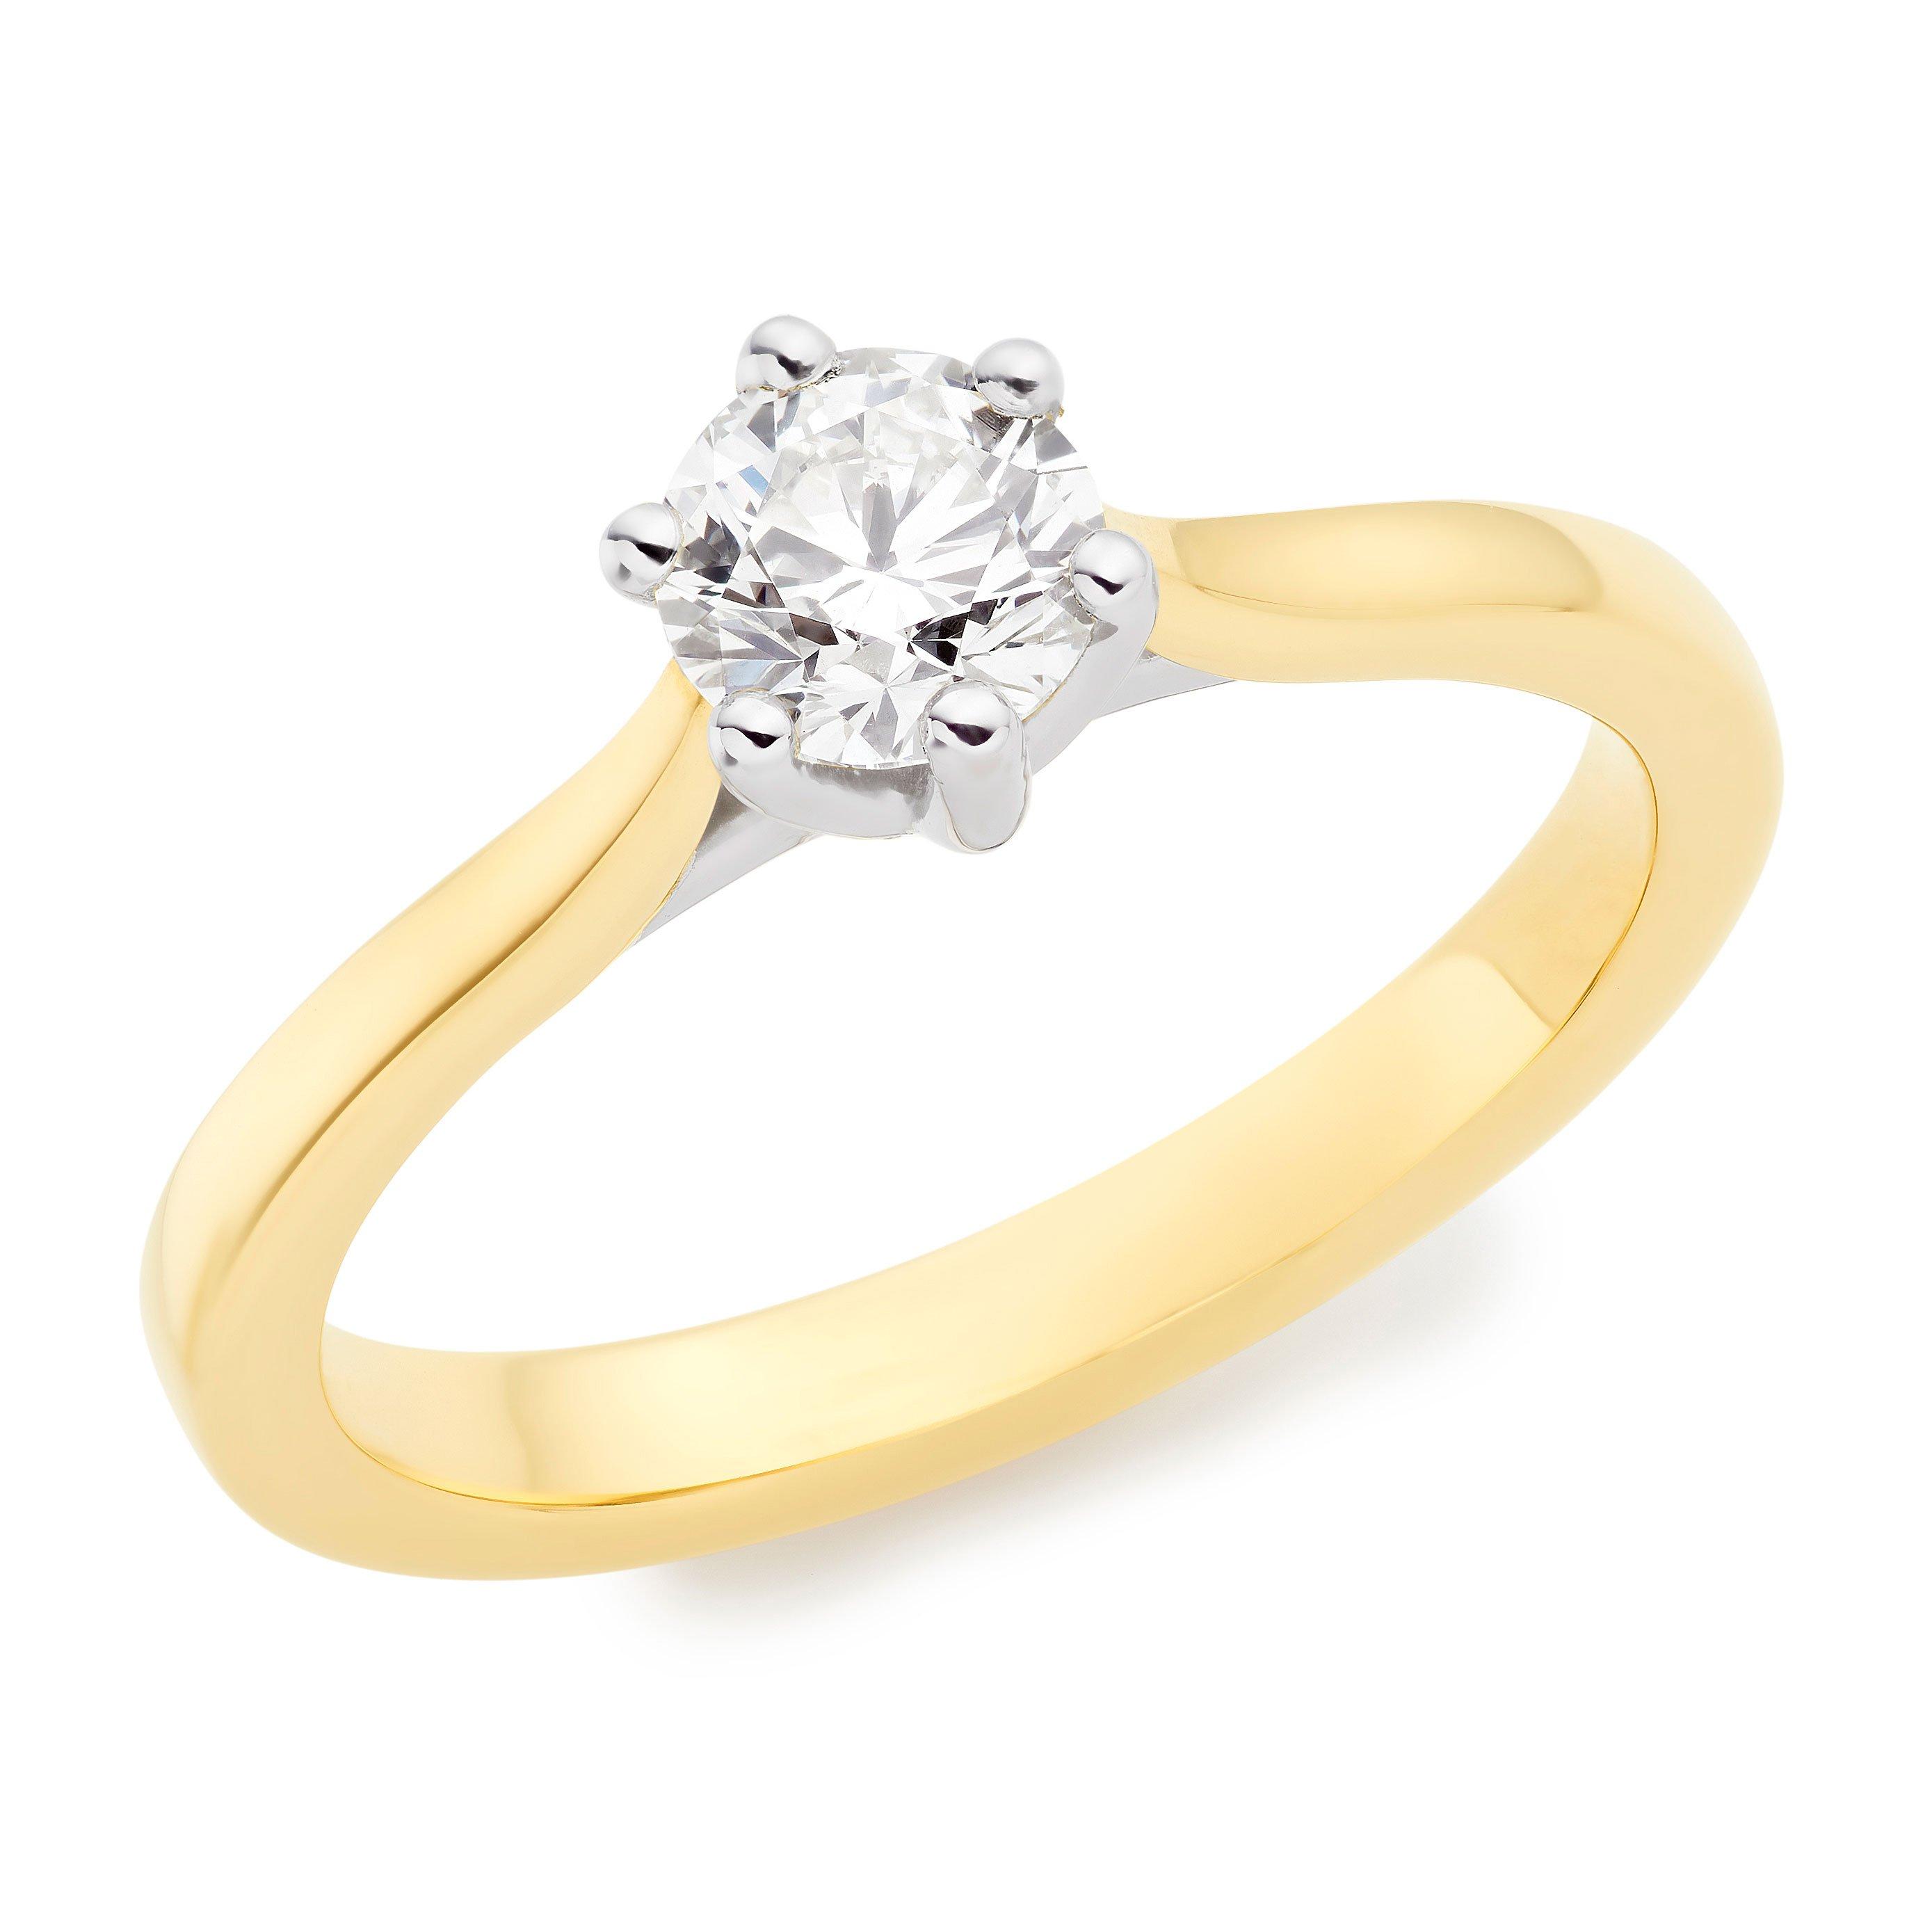 18ct Yellow Gold Diamond Solitaire Ring | 0133648 | Beaverbrooks the ...